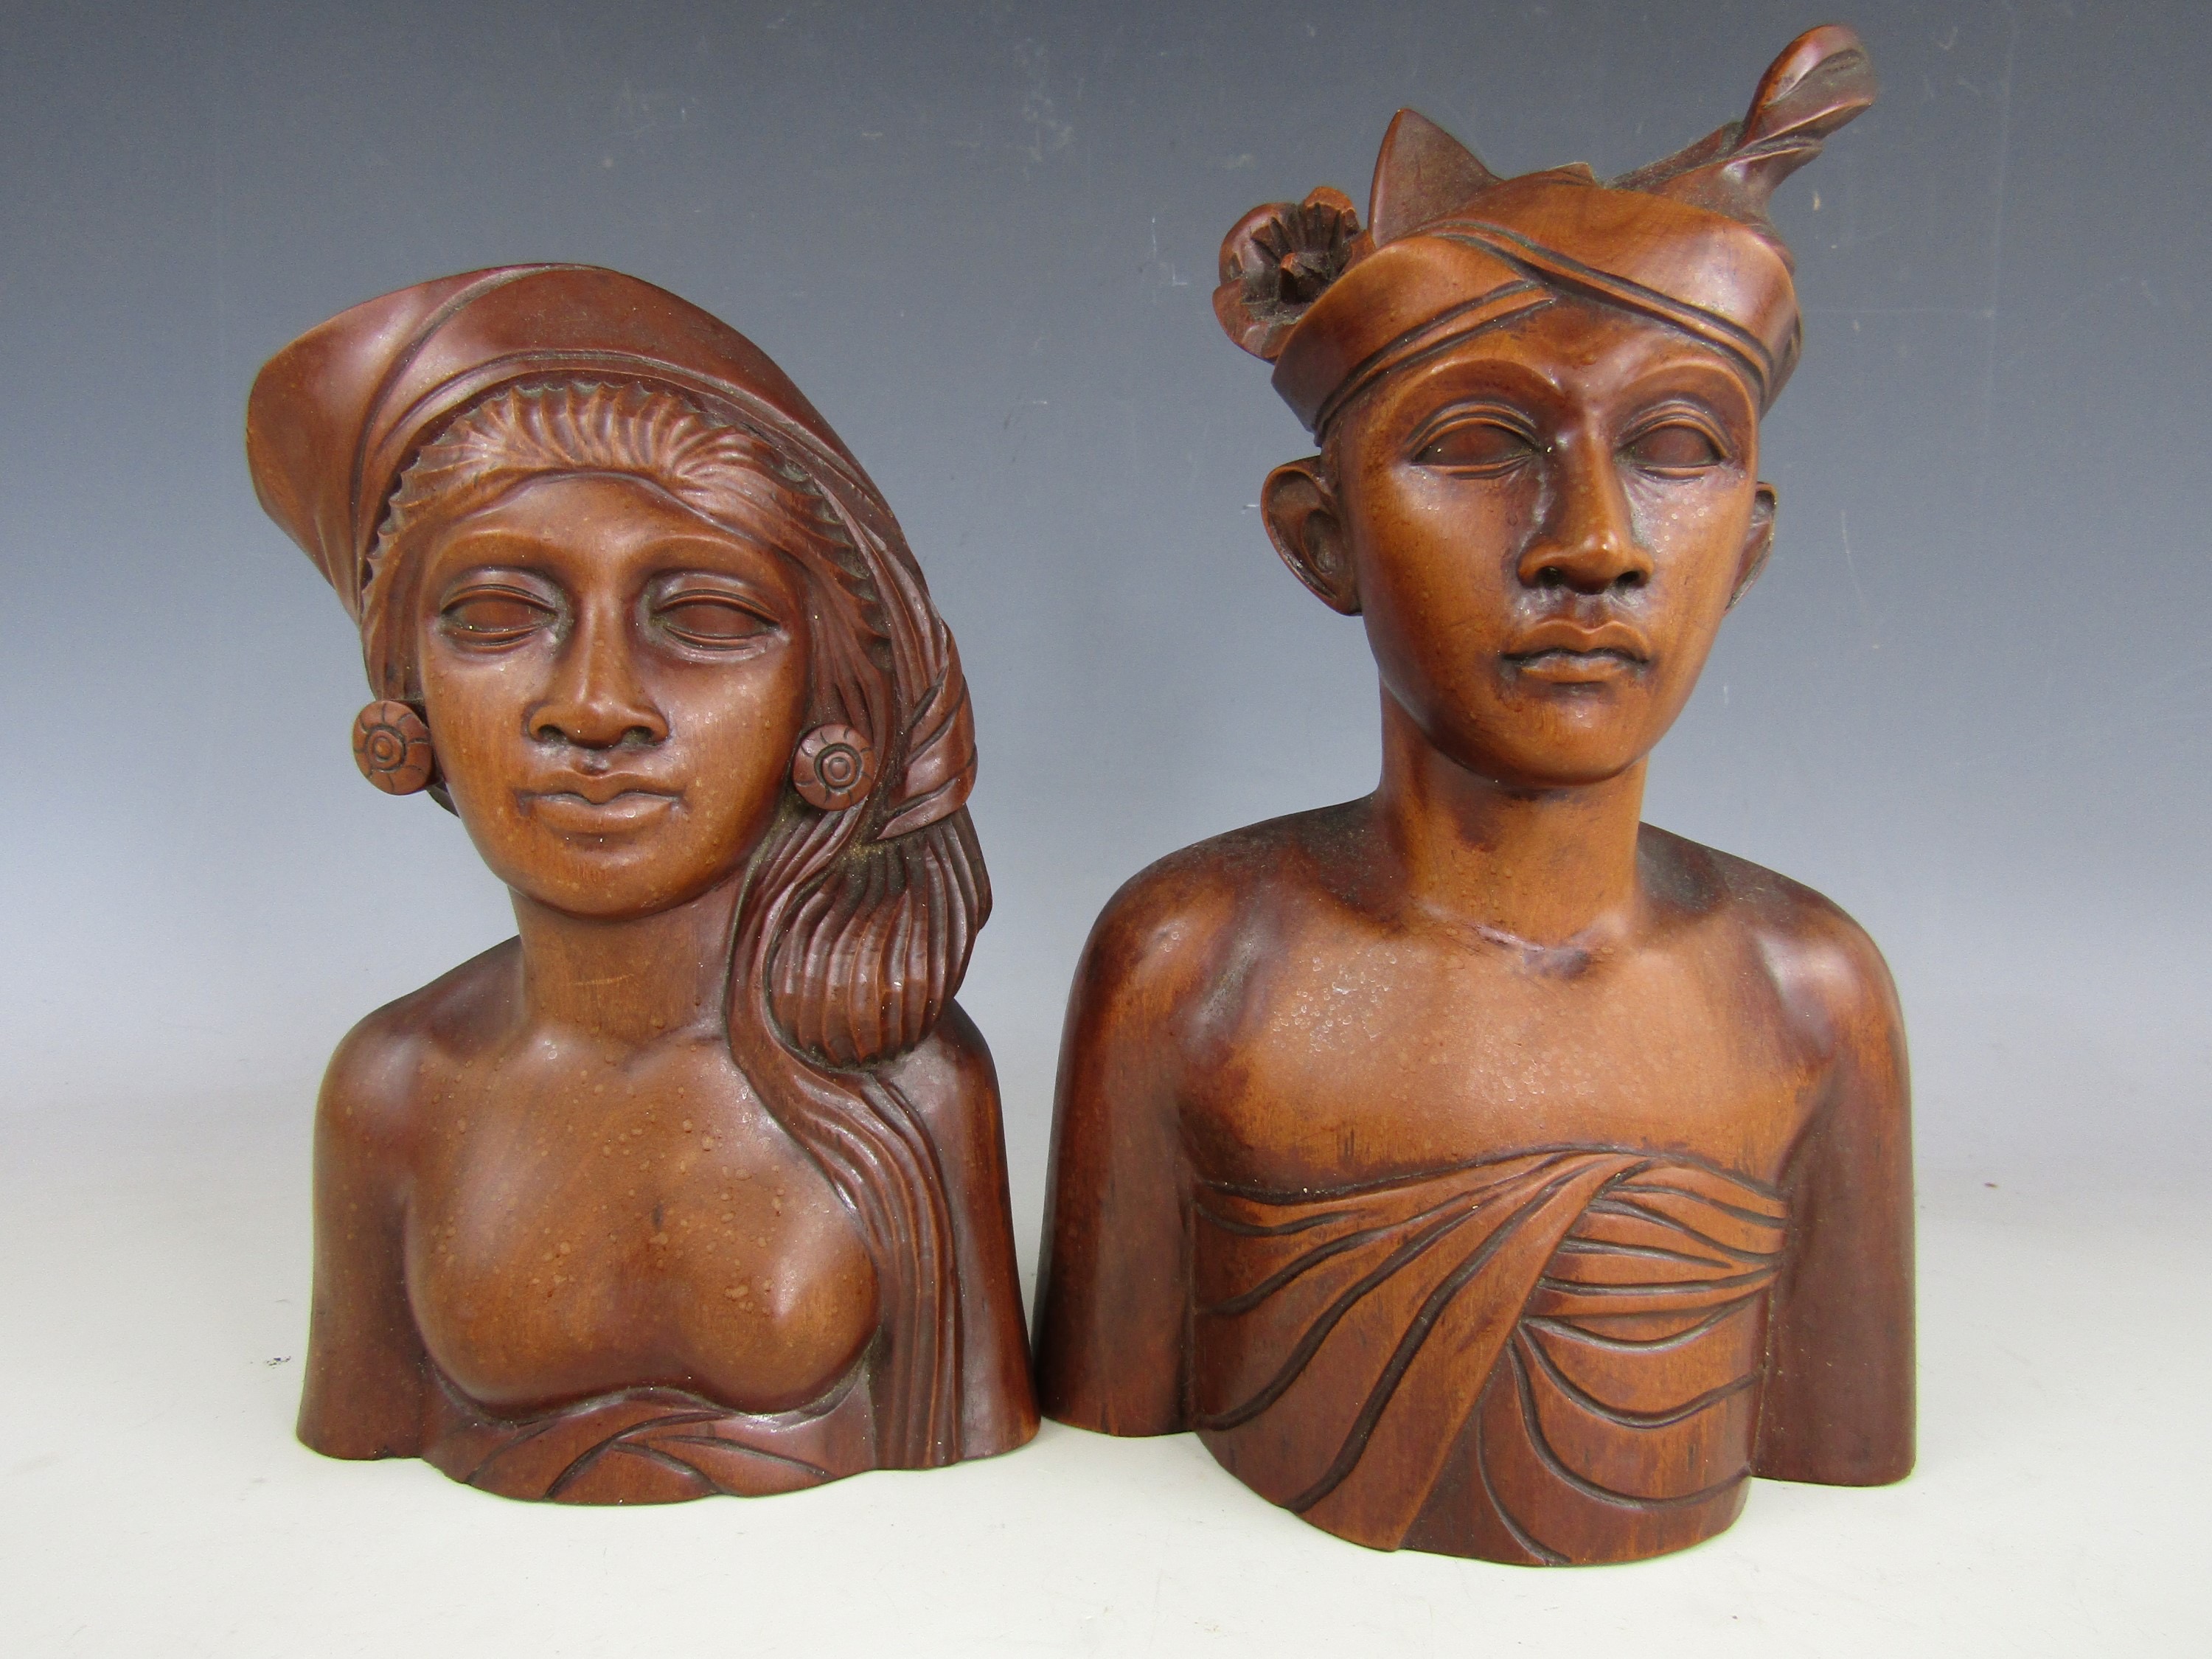 A pair of Balinese busts